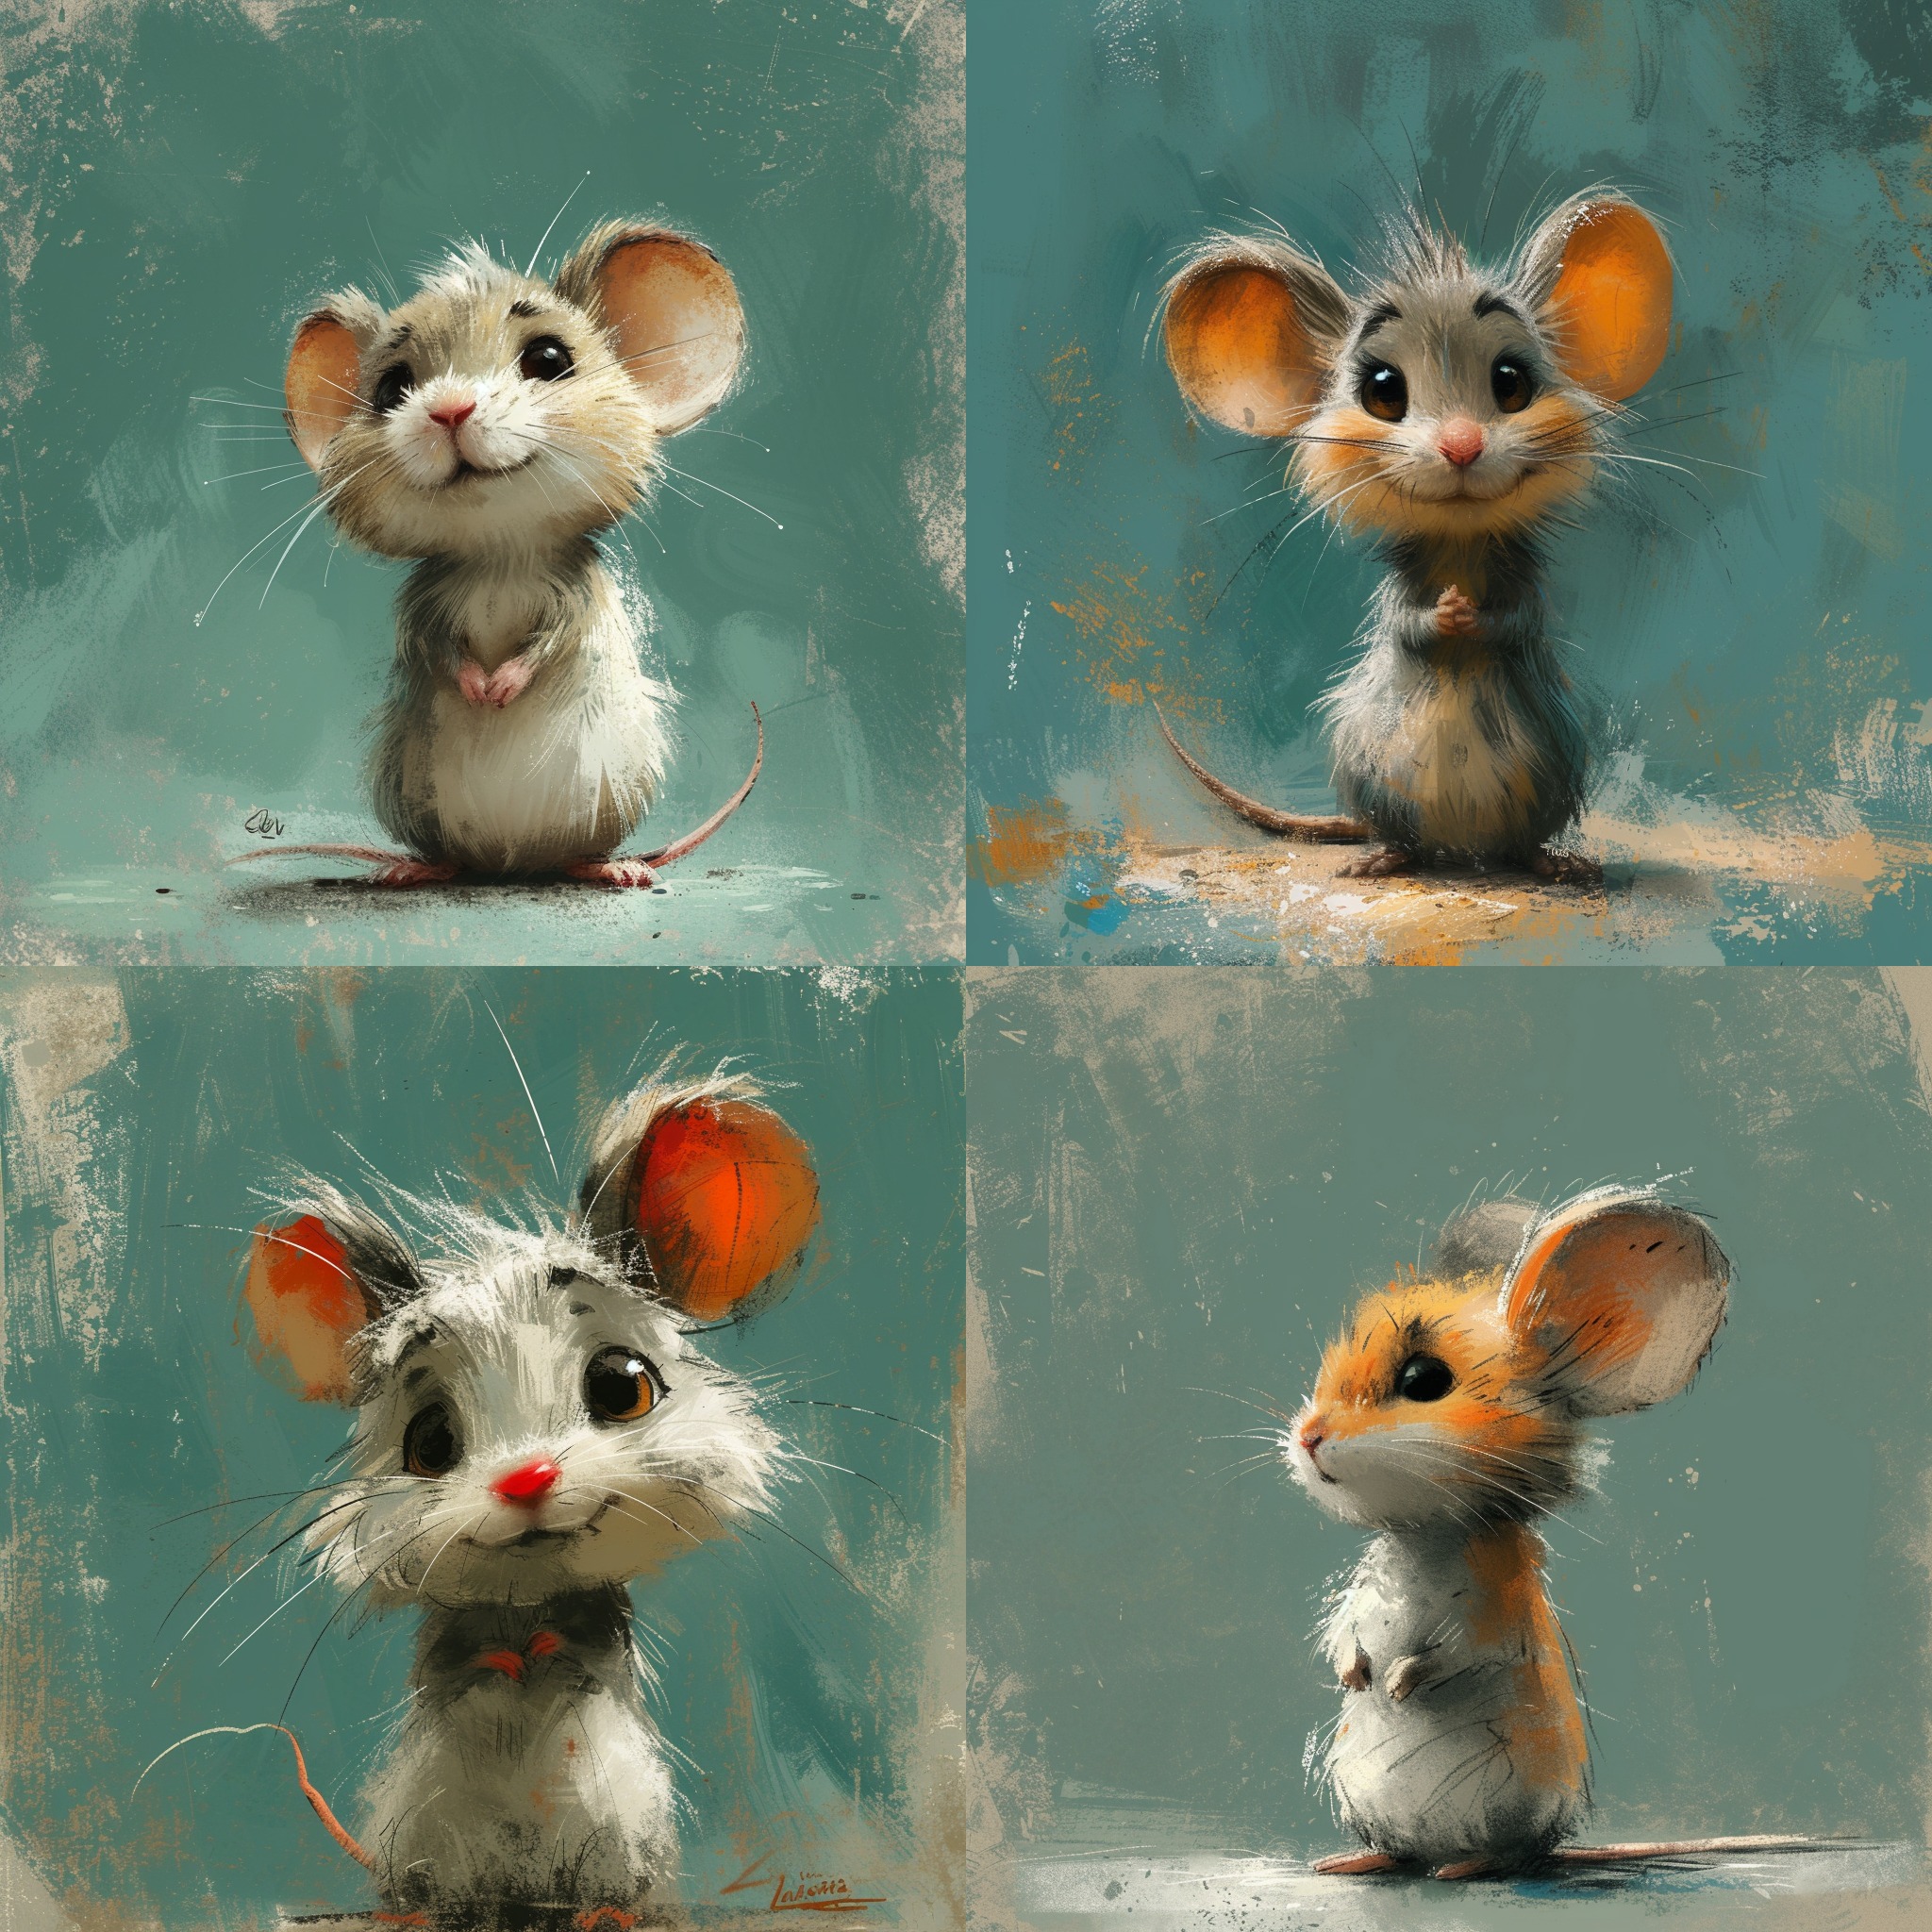 Messy art line sketch of a cute mouse cartoon illustration style. characterized by extremely simplif